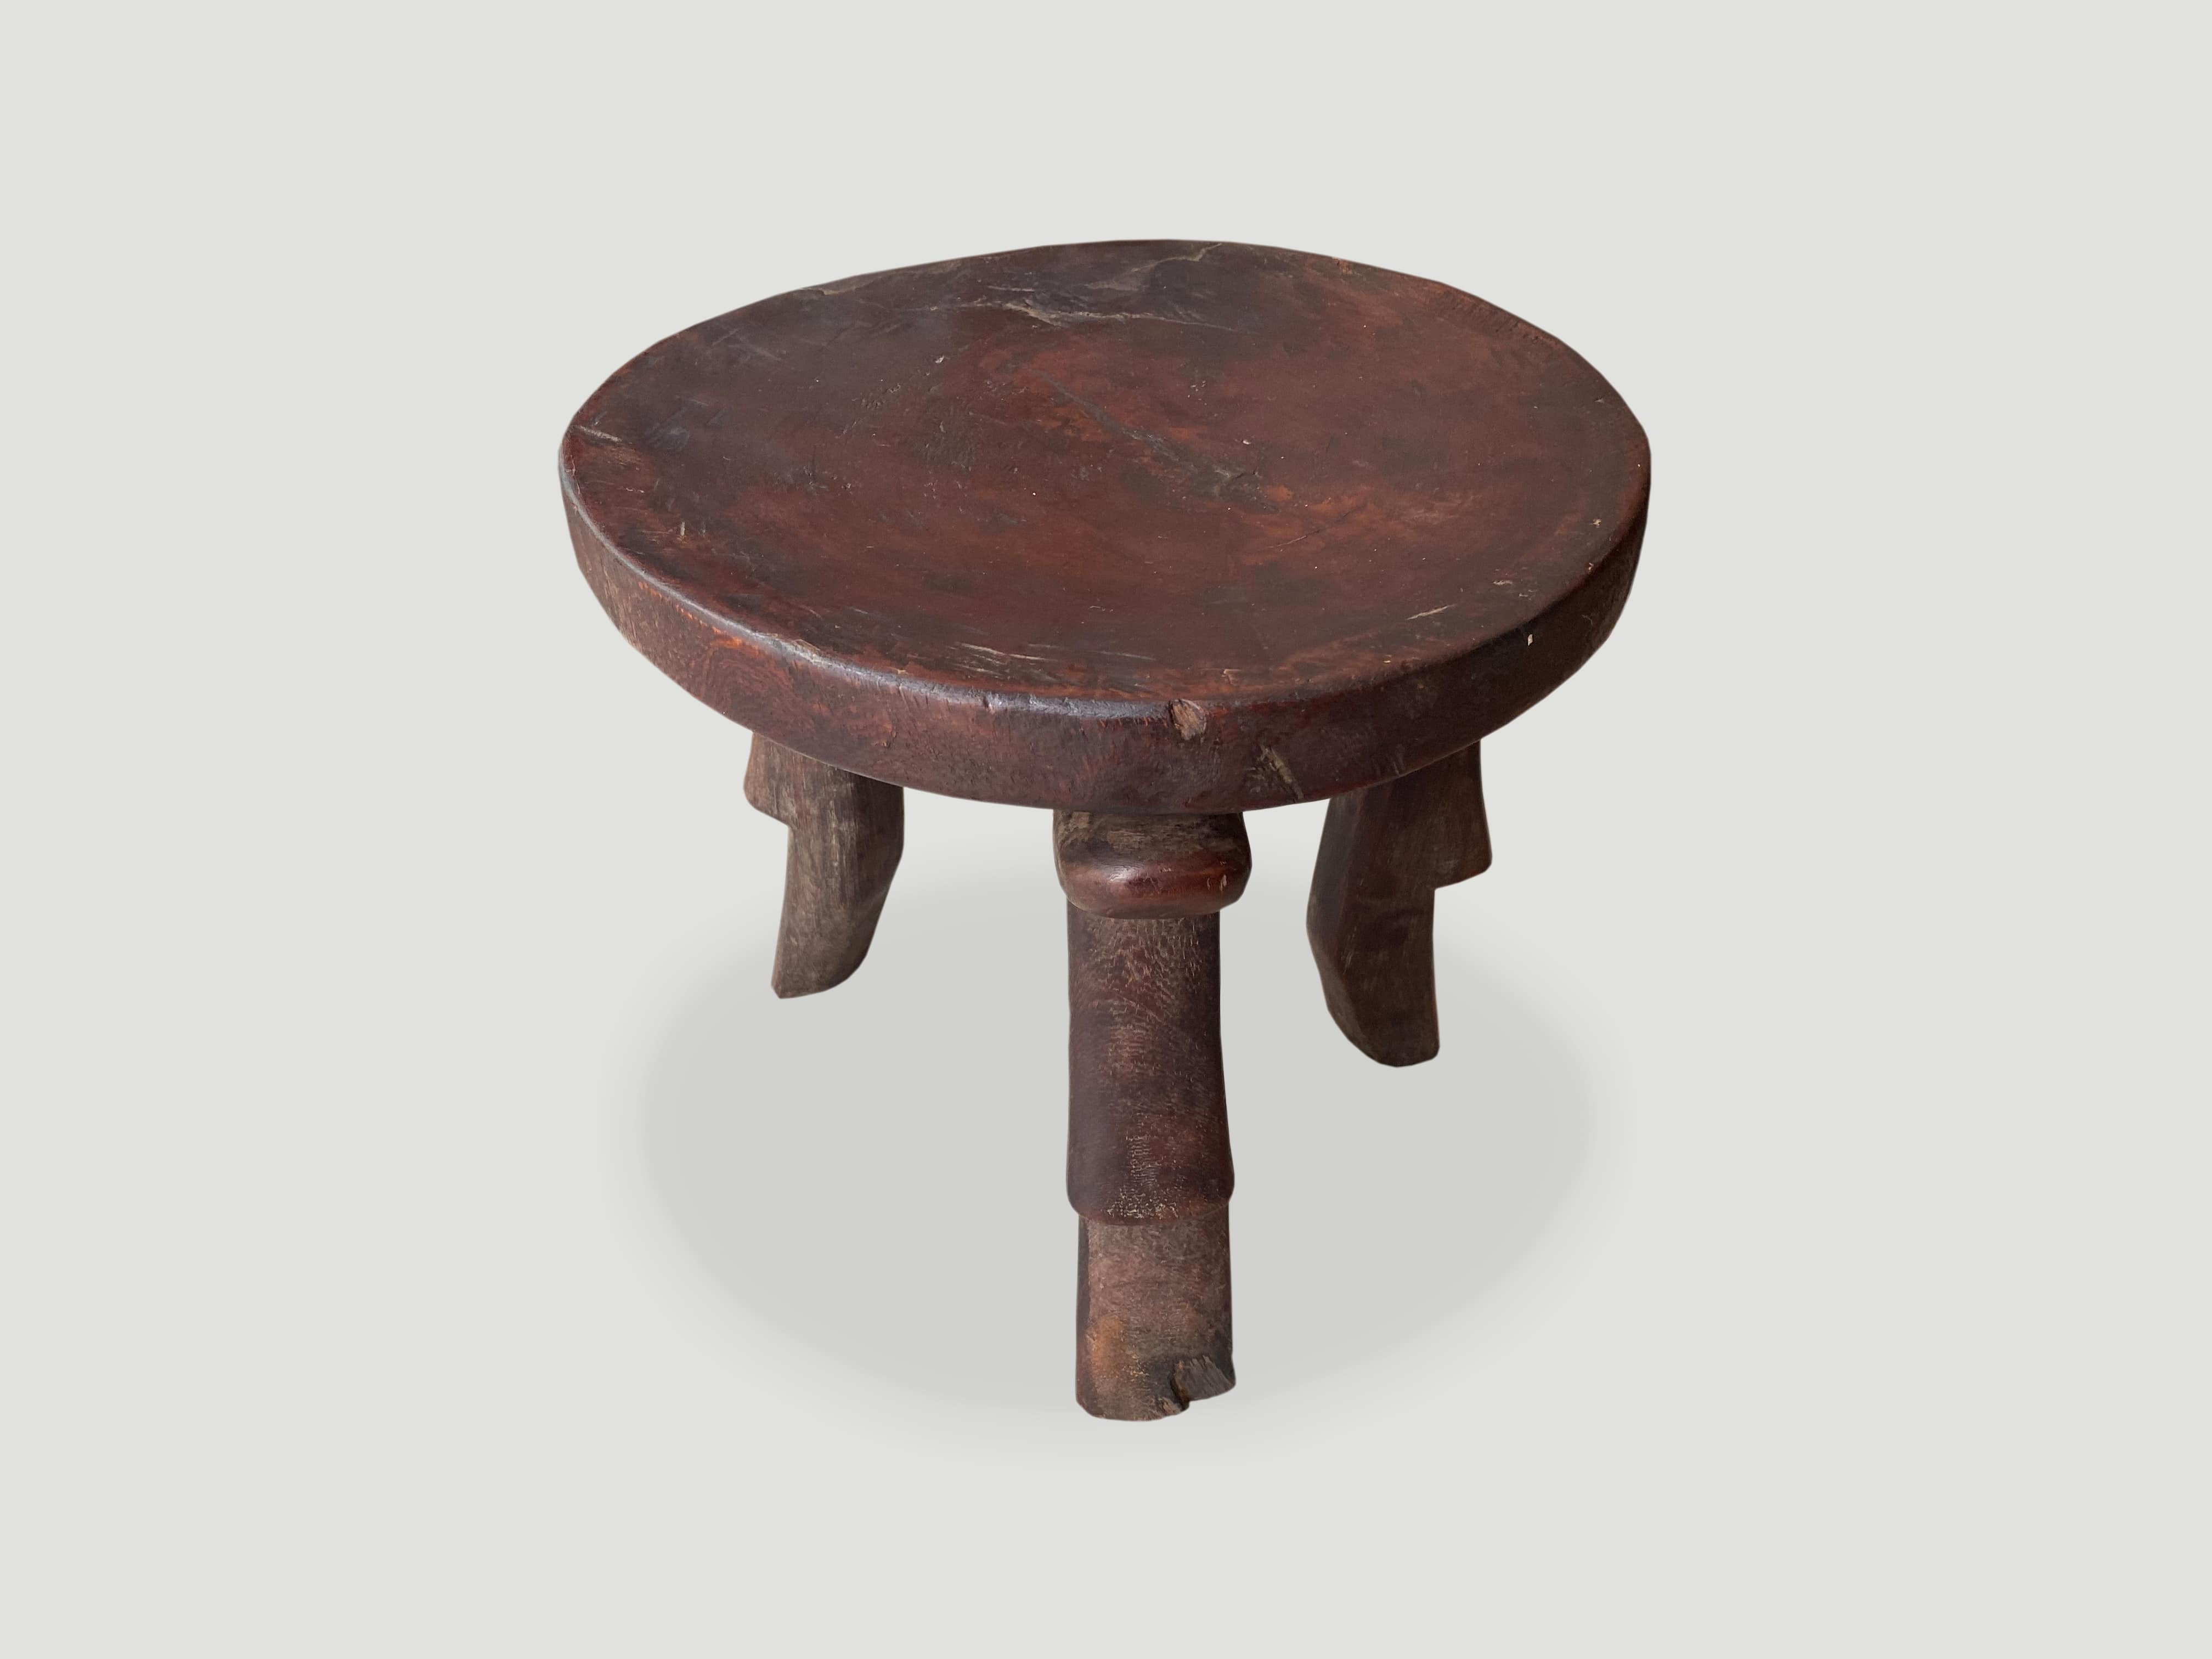 hand carved African side table or stool